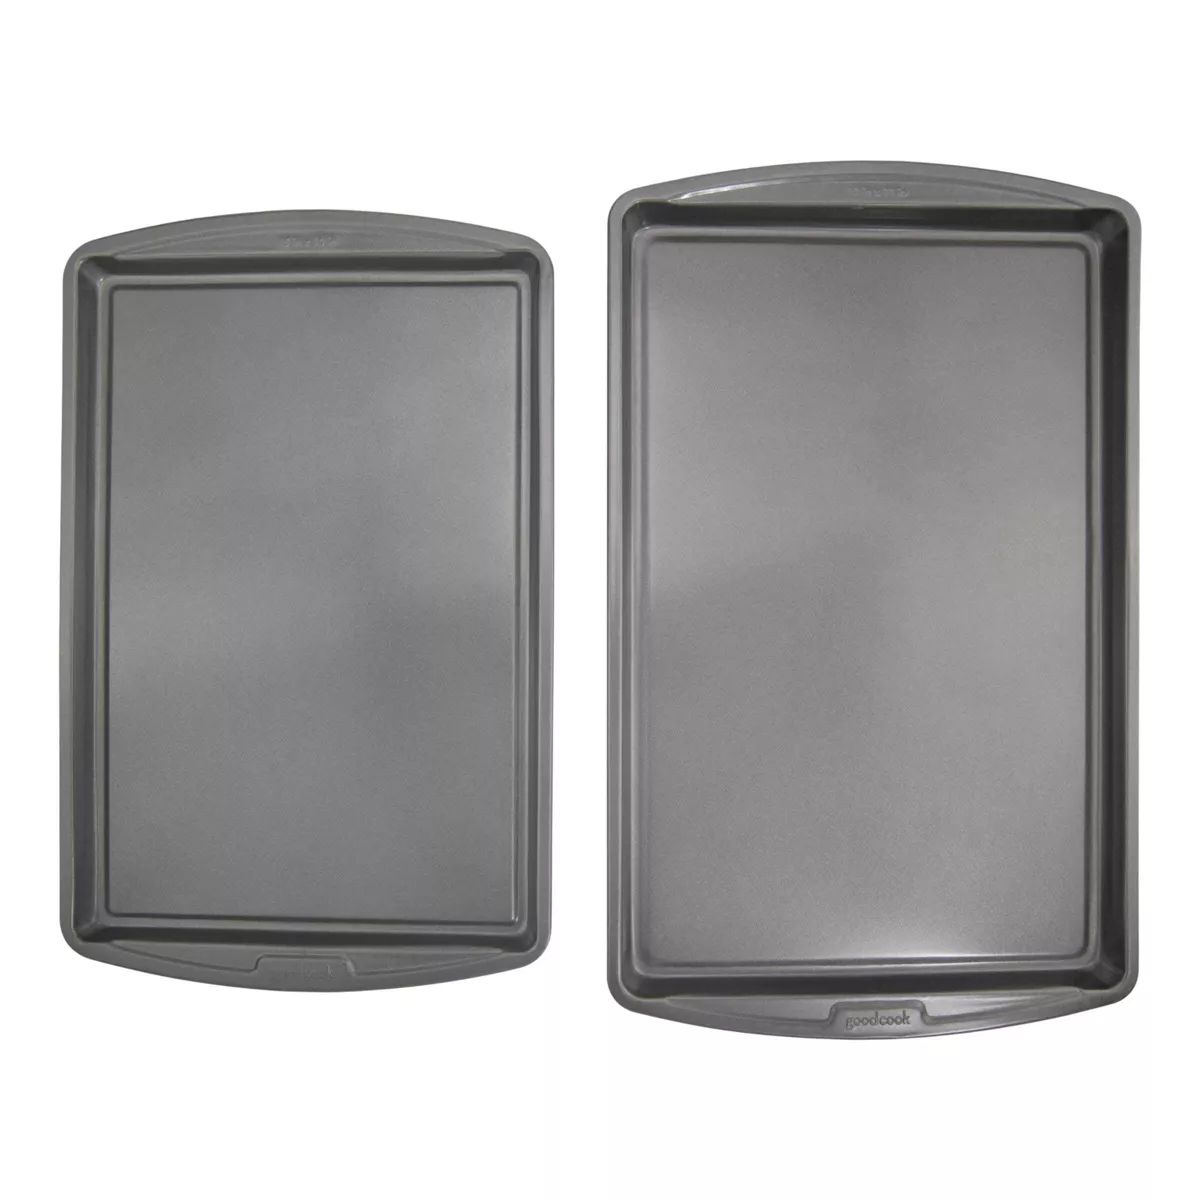 GoodCook Ready 2pk Cookie Sheets (17"x11" and 15"x10") | Target